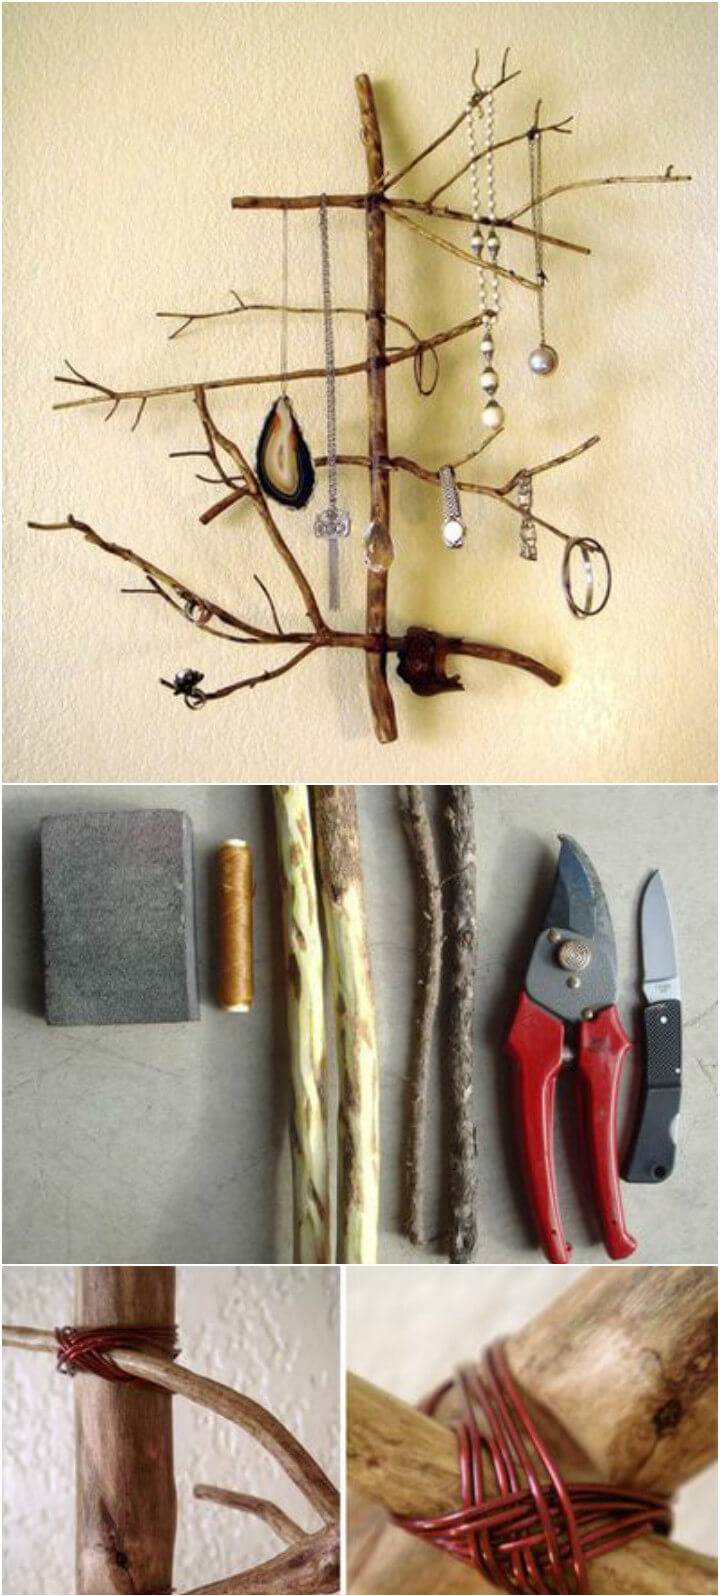 old twigs into fancy jewelry display and organizer